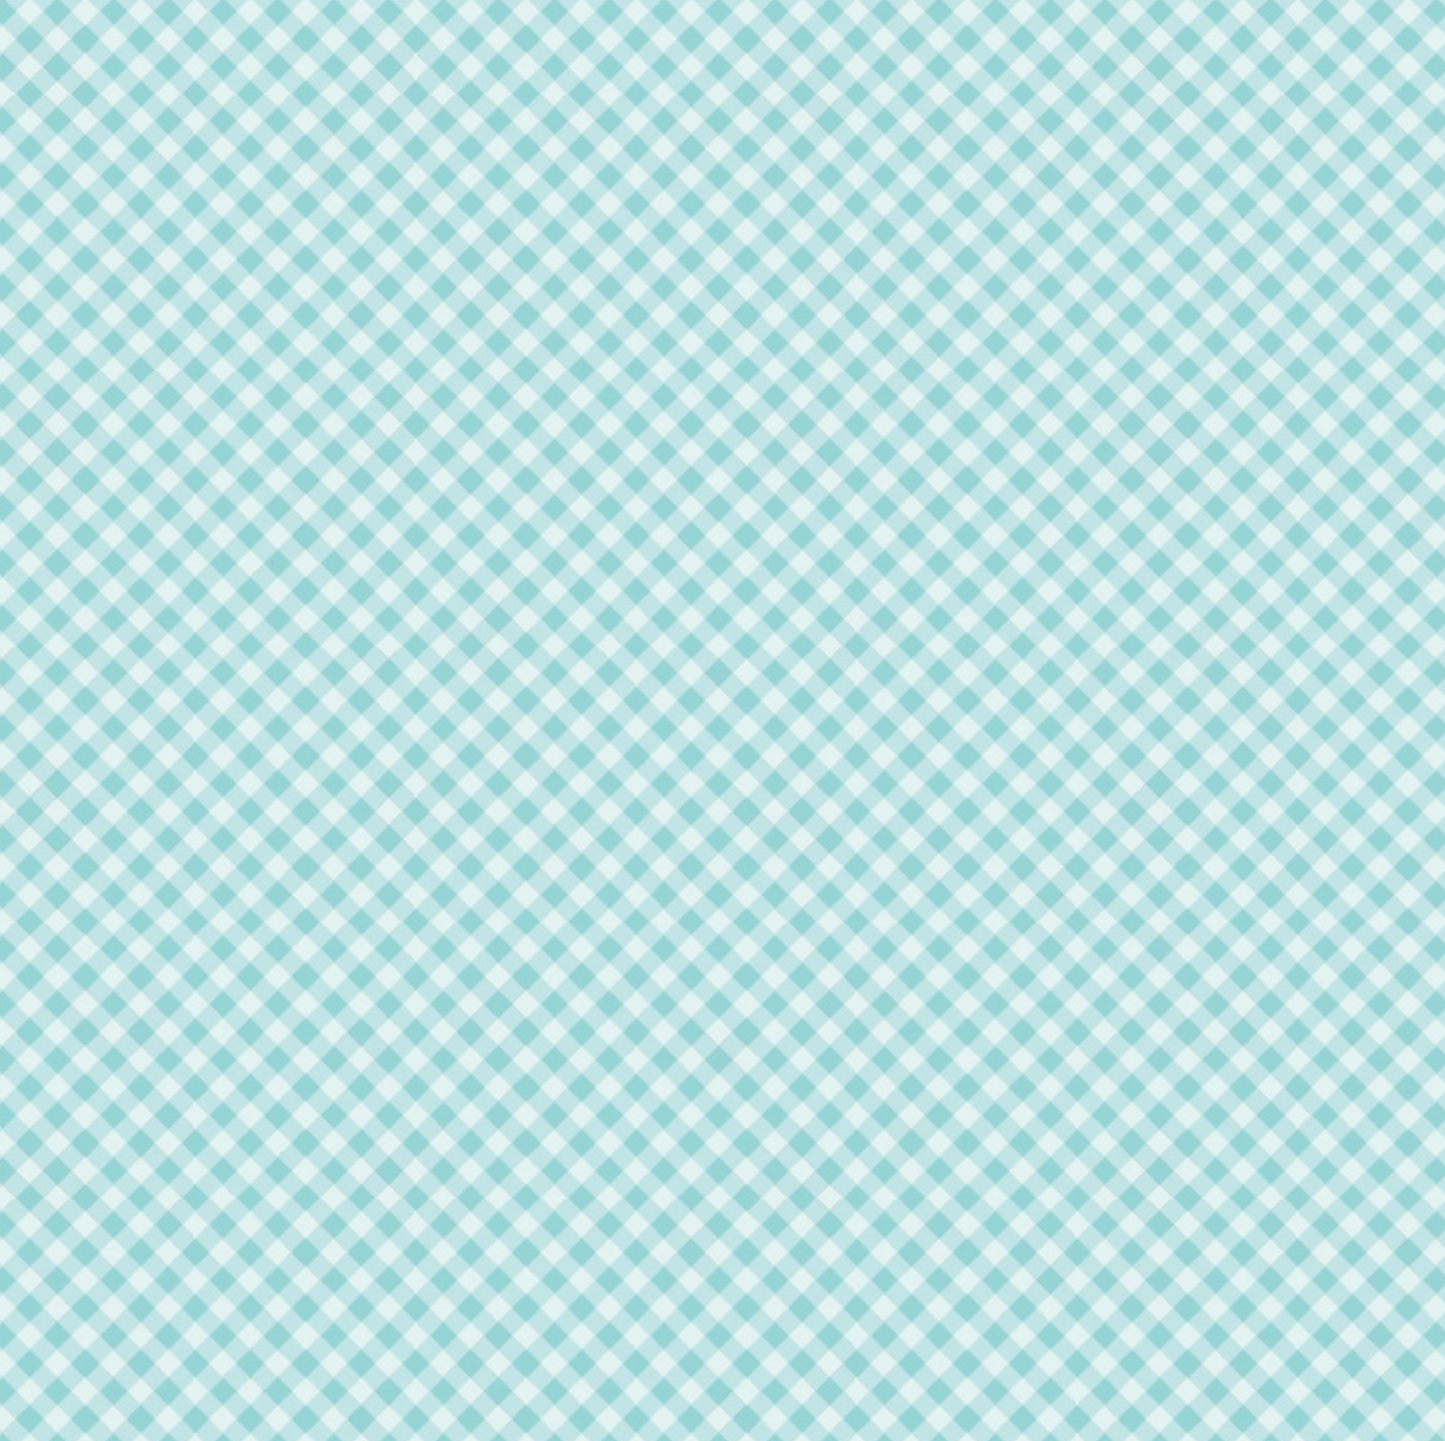 Prairie Sisters Homestead Gingham Forever Teal PH23409, sold by the 1/2 yard